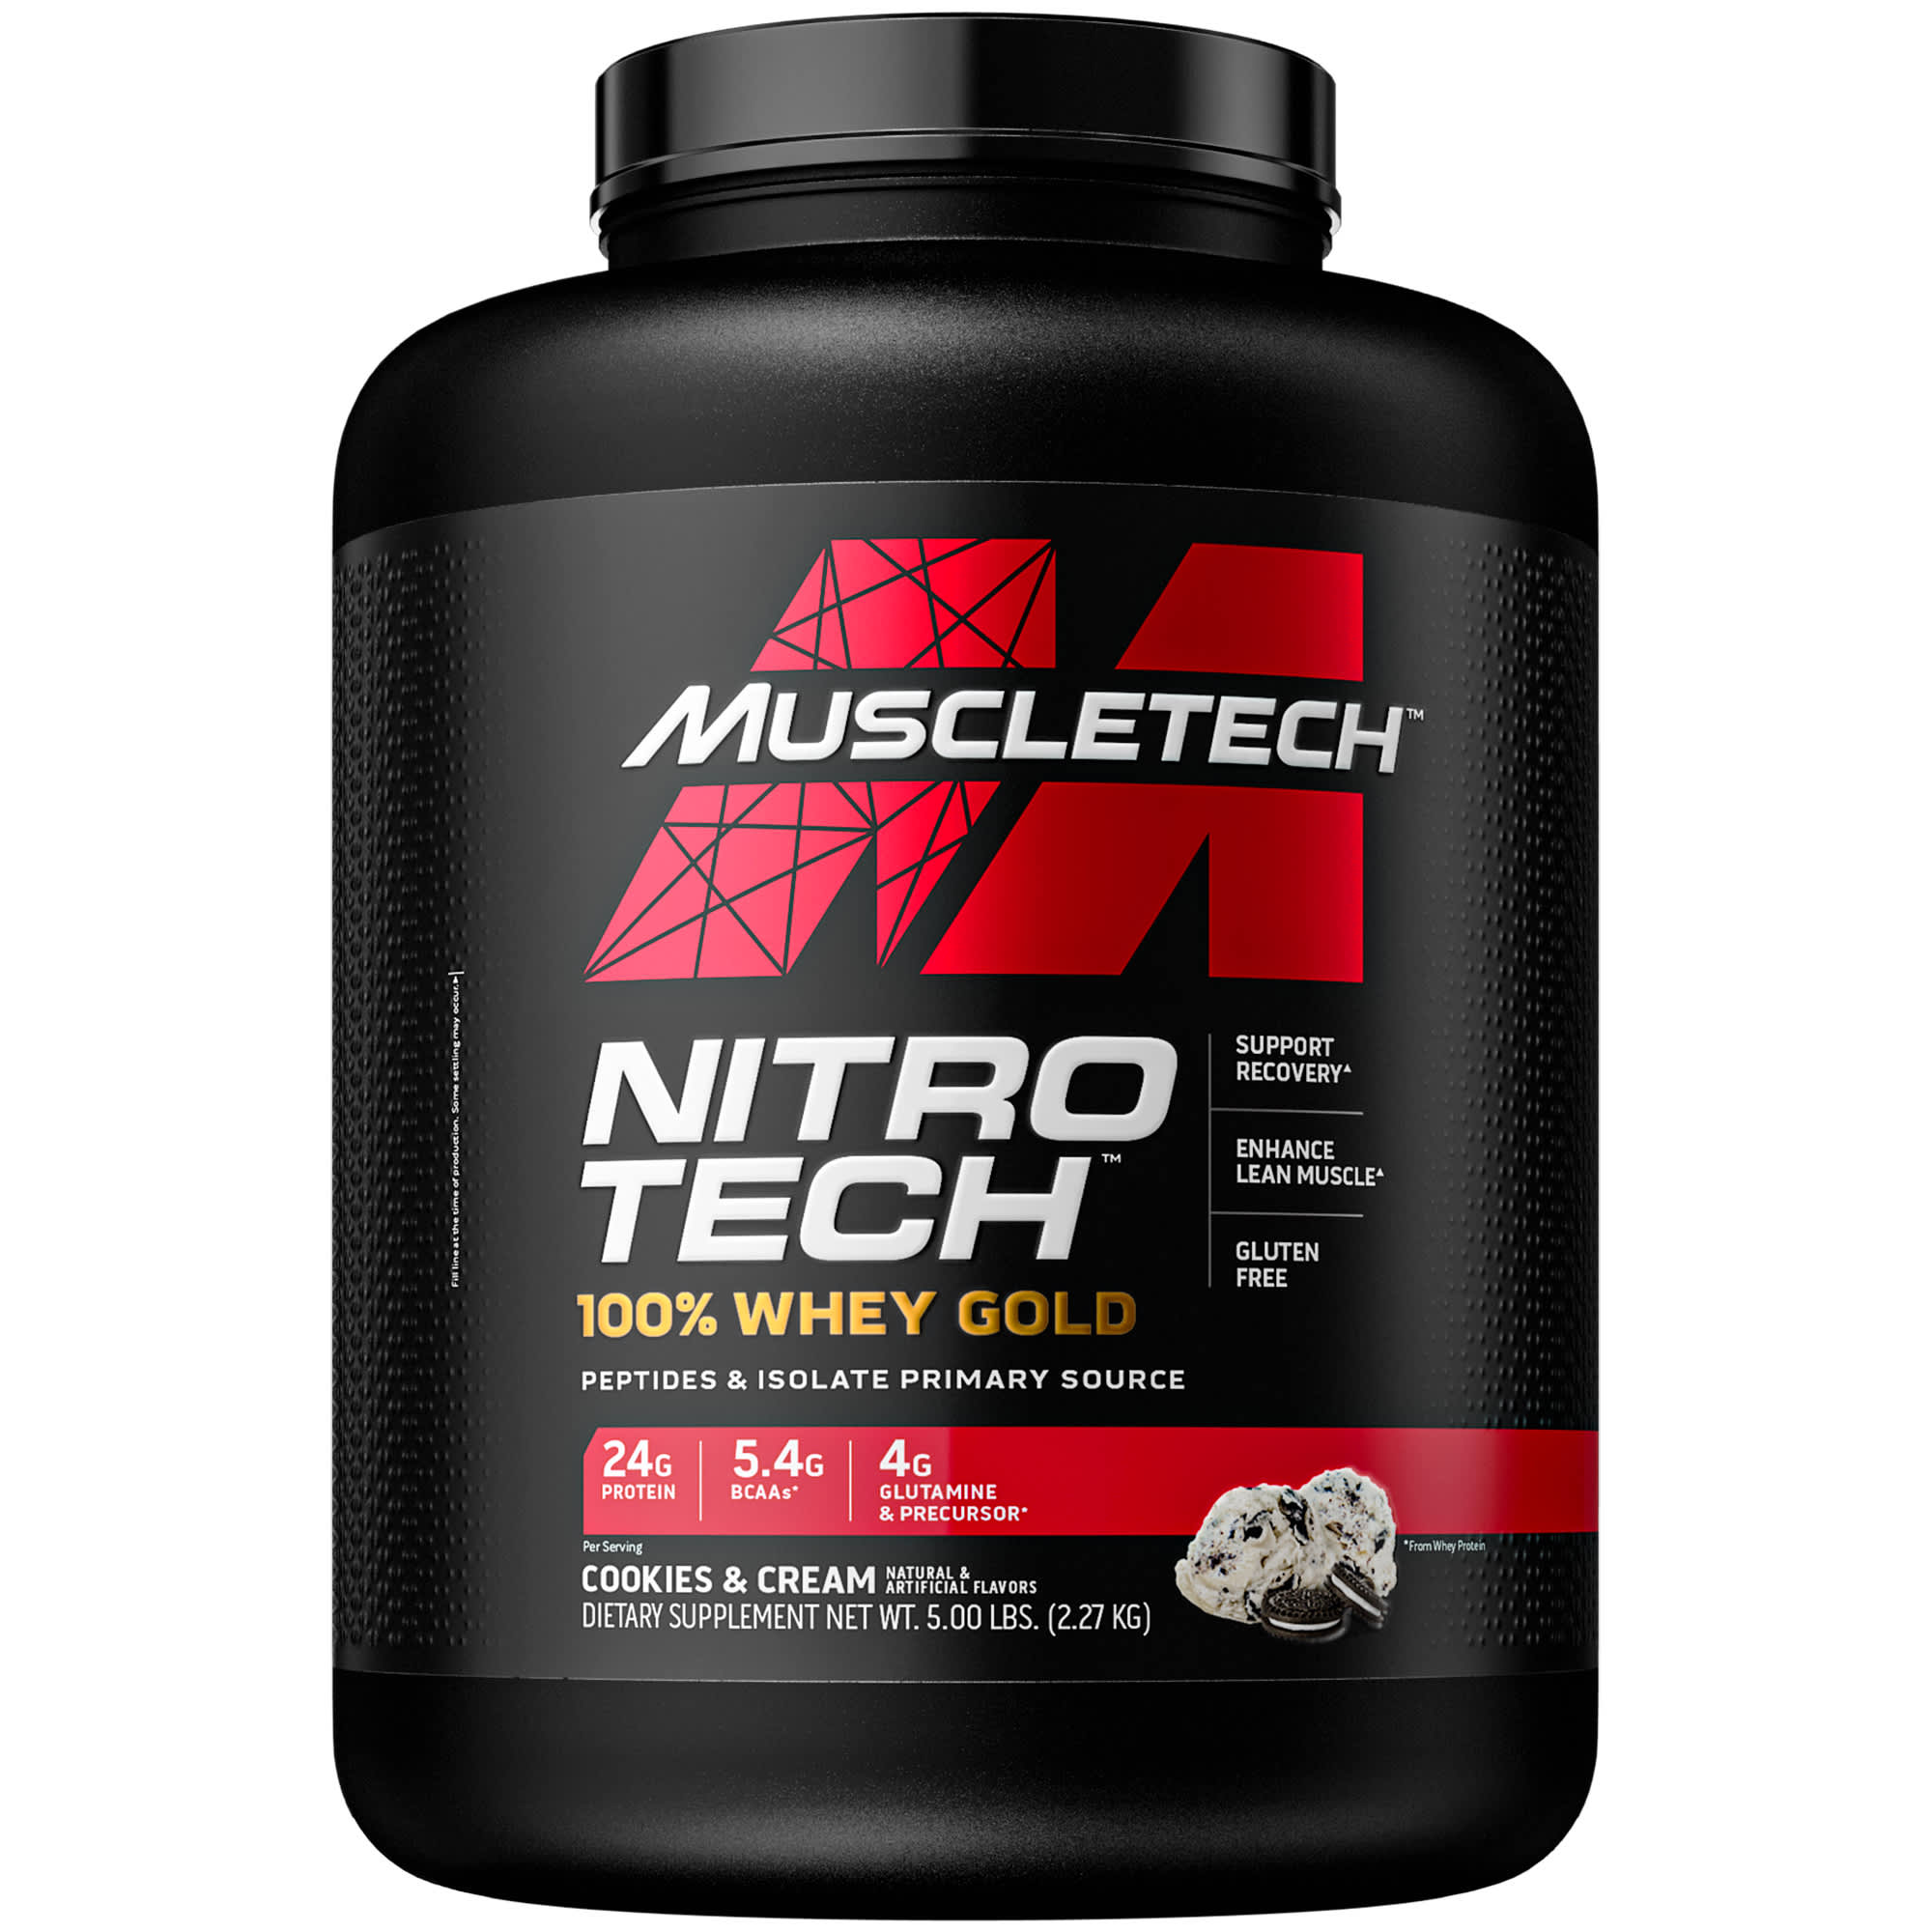 Lean Musclebuilder 1.80 Cookies and Cream 3.97 lbs Nitro Tech Whey Isolate 